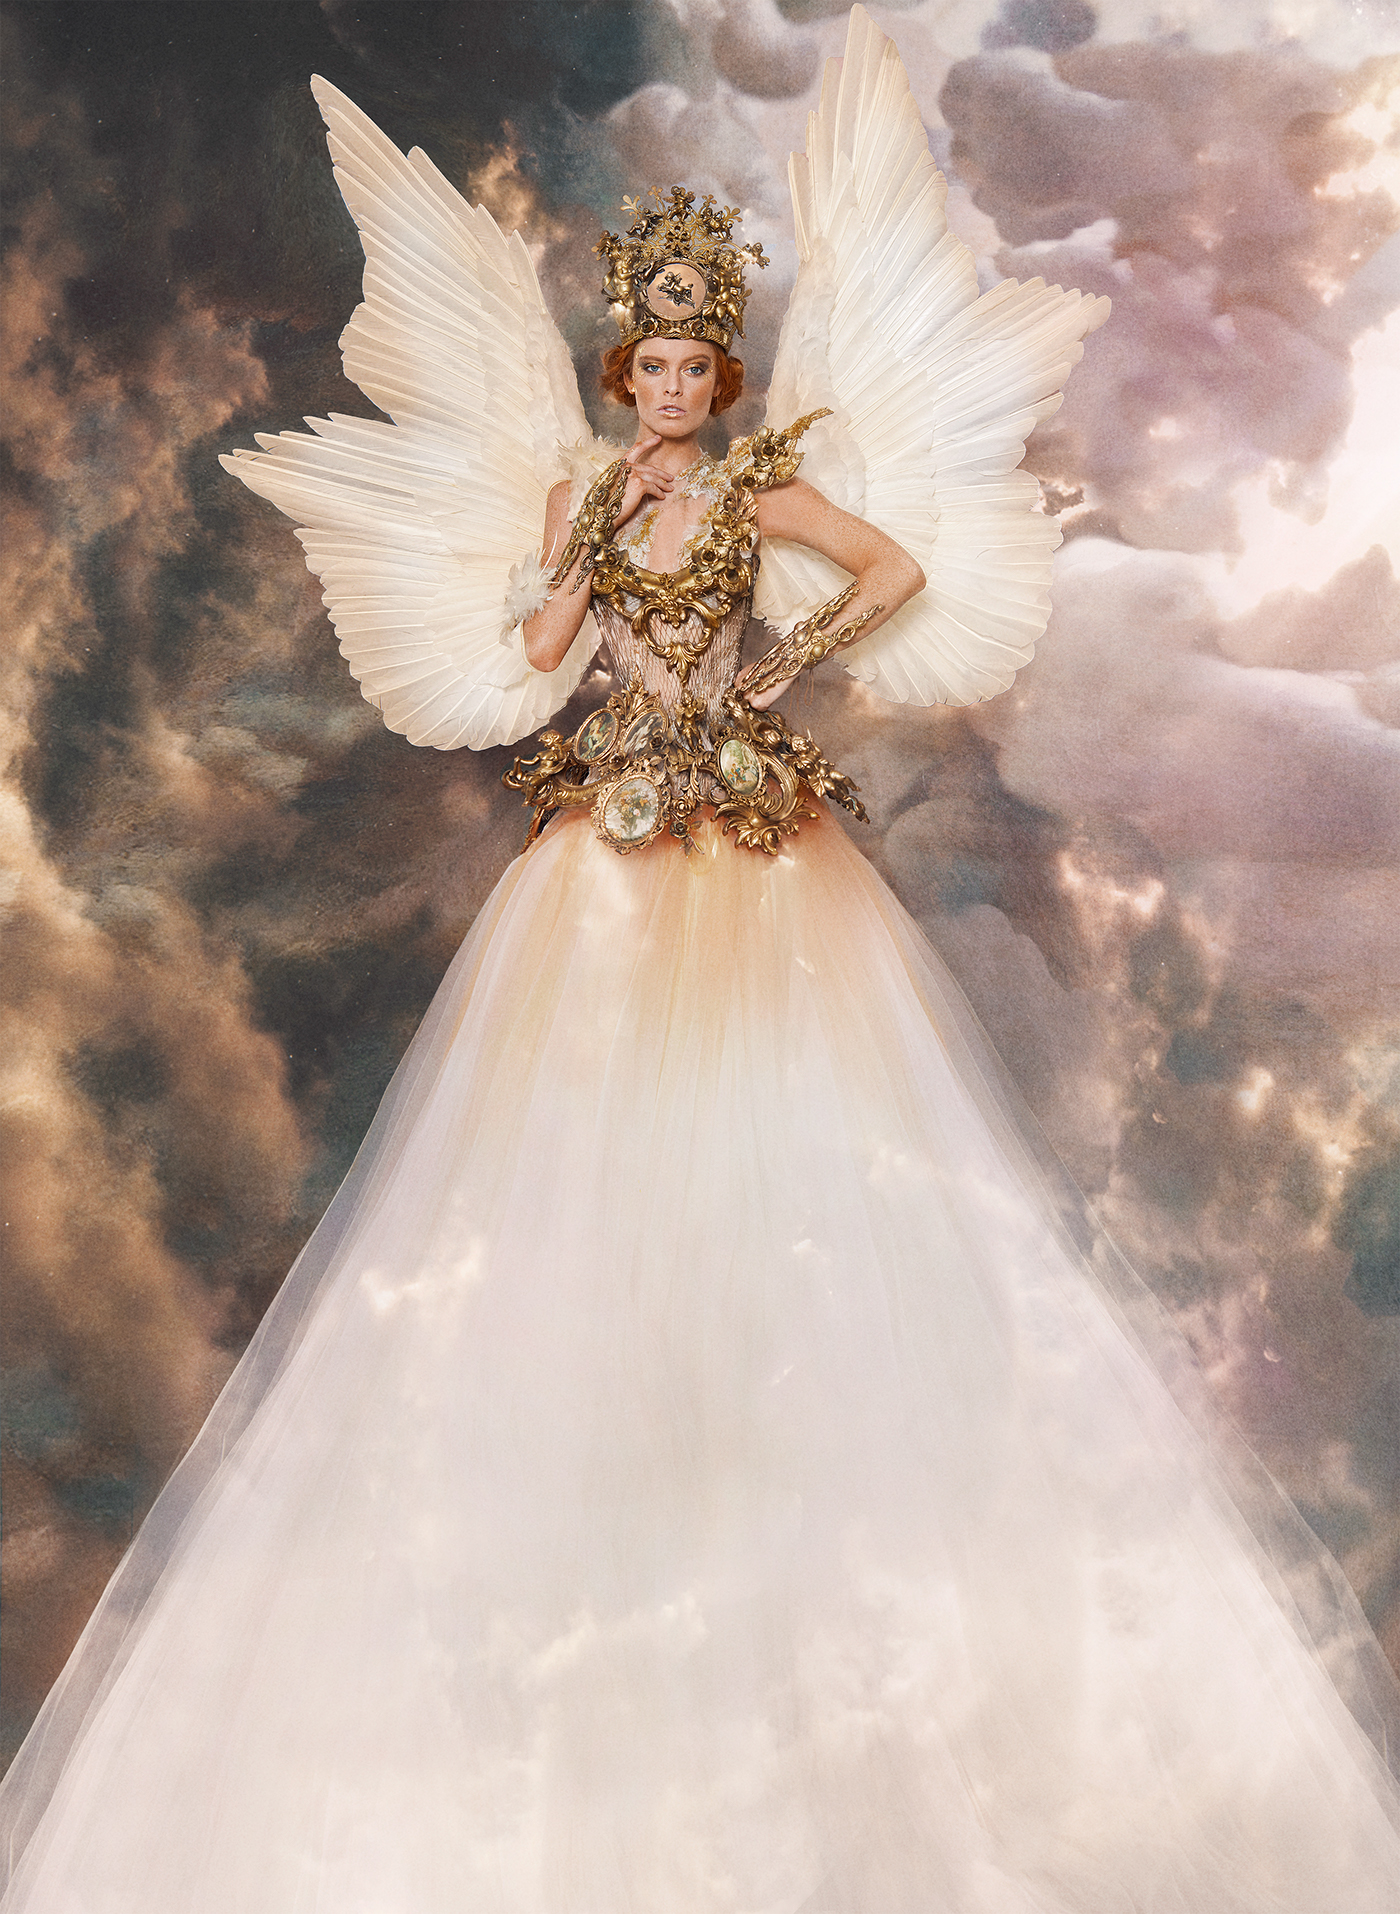 jvdas berra angel devil Chloe Hurst fiori couture Romercee vintage fantasy editorial gold wings feathers Haute couture clouds